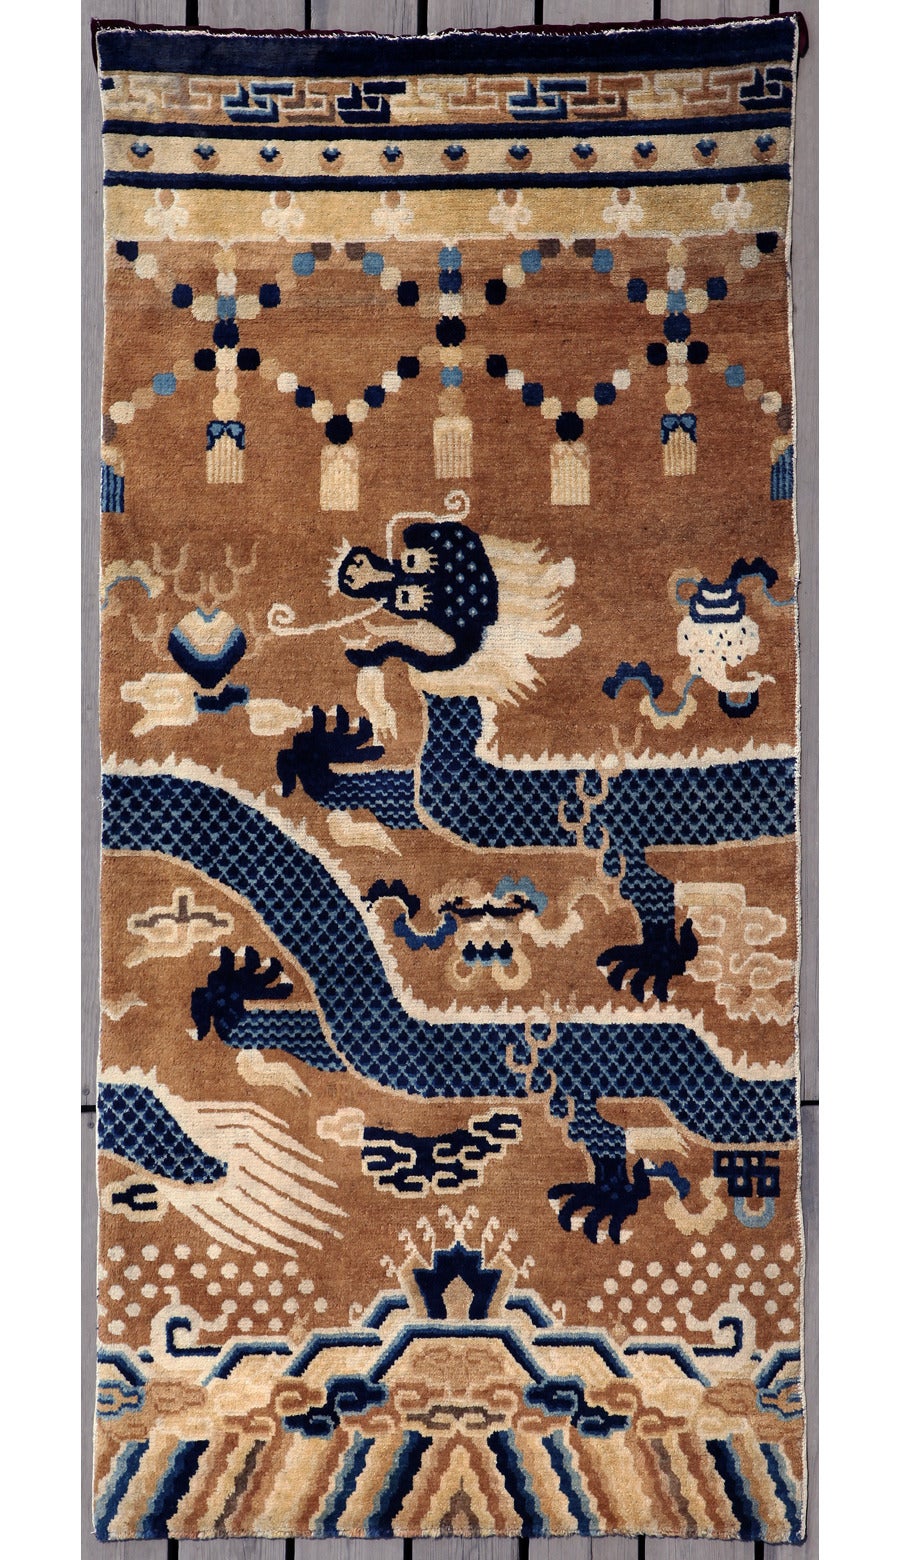 This is a Classic antique Ningxia pillar rug from China with the depiction of a five-clawed dragon playing with the flaming pearl.
 
For centuries, Ningxia rugs have been praised for the quality of their wool, design and colors. Collectors of